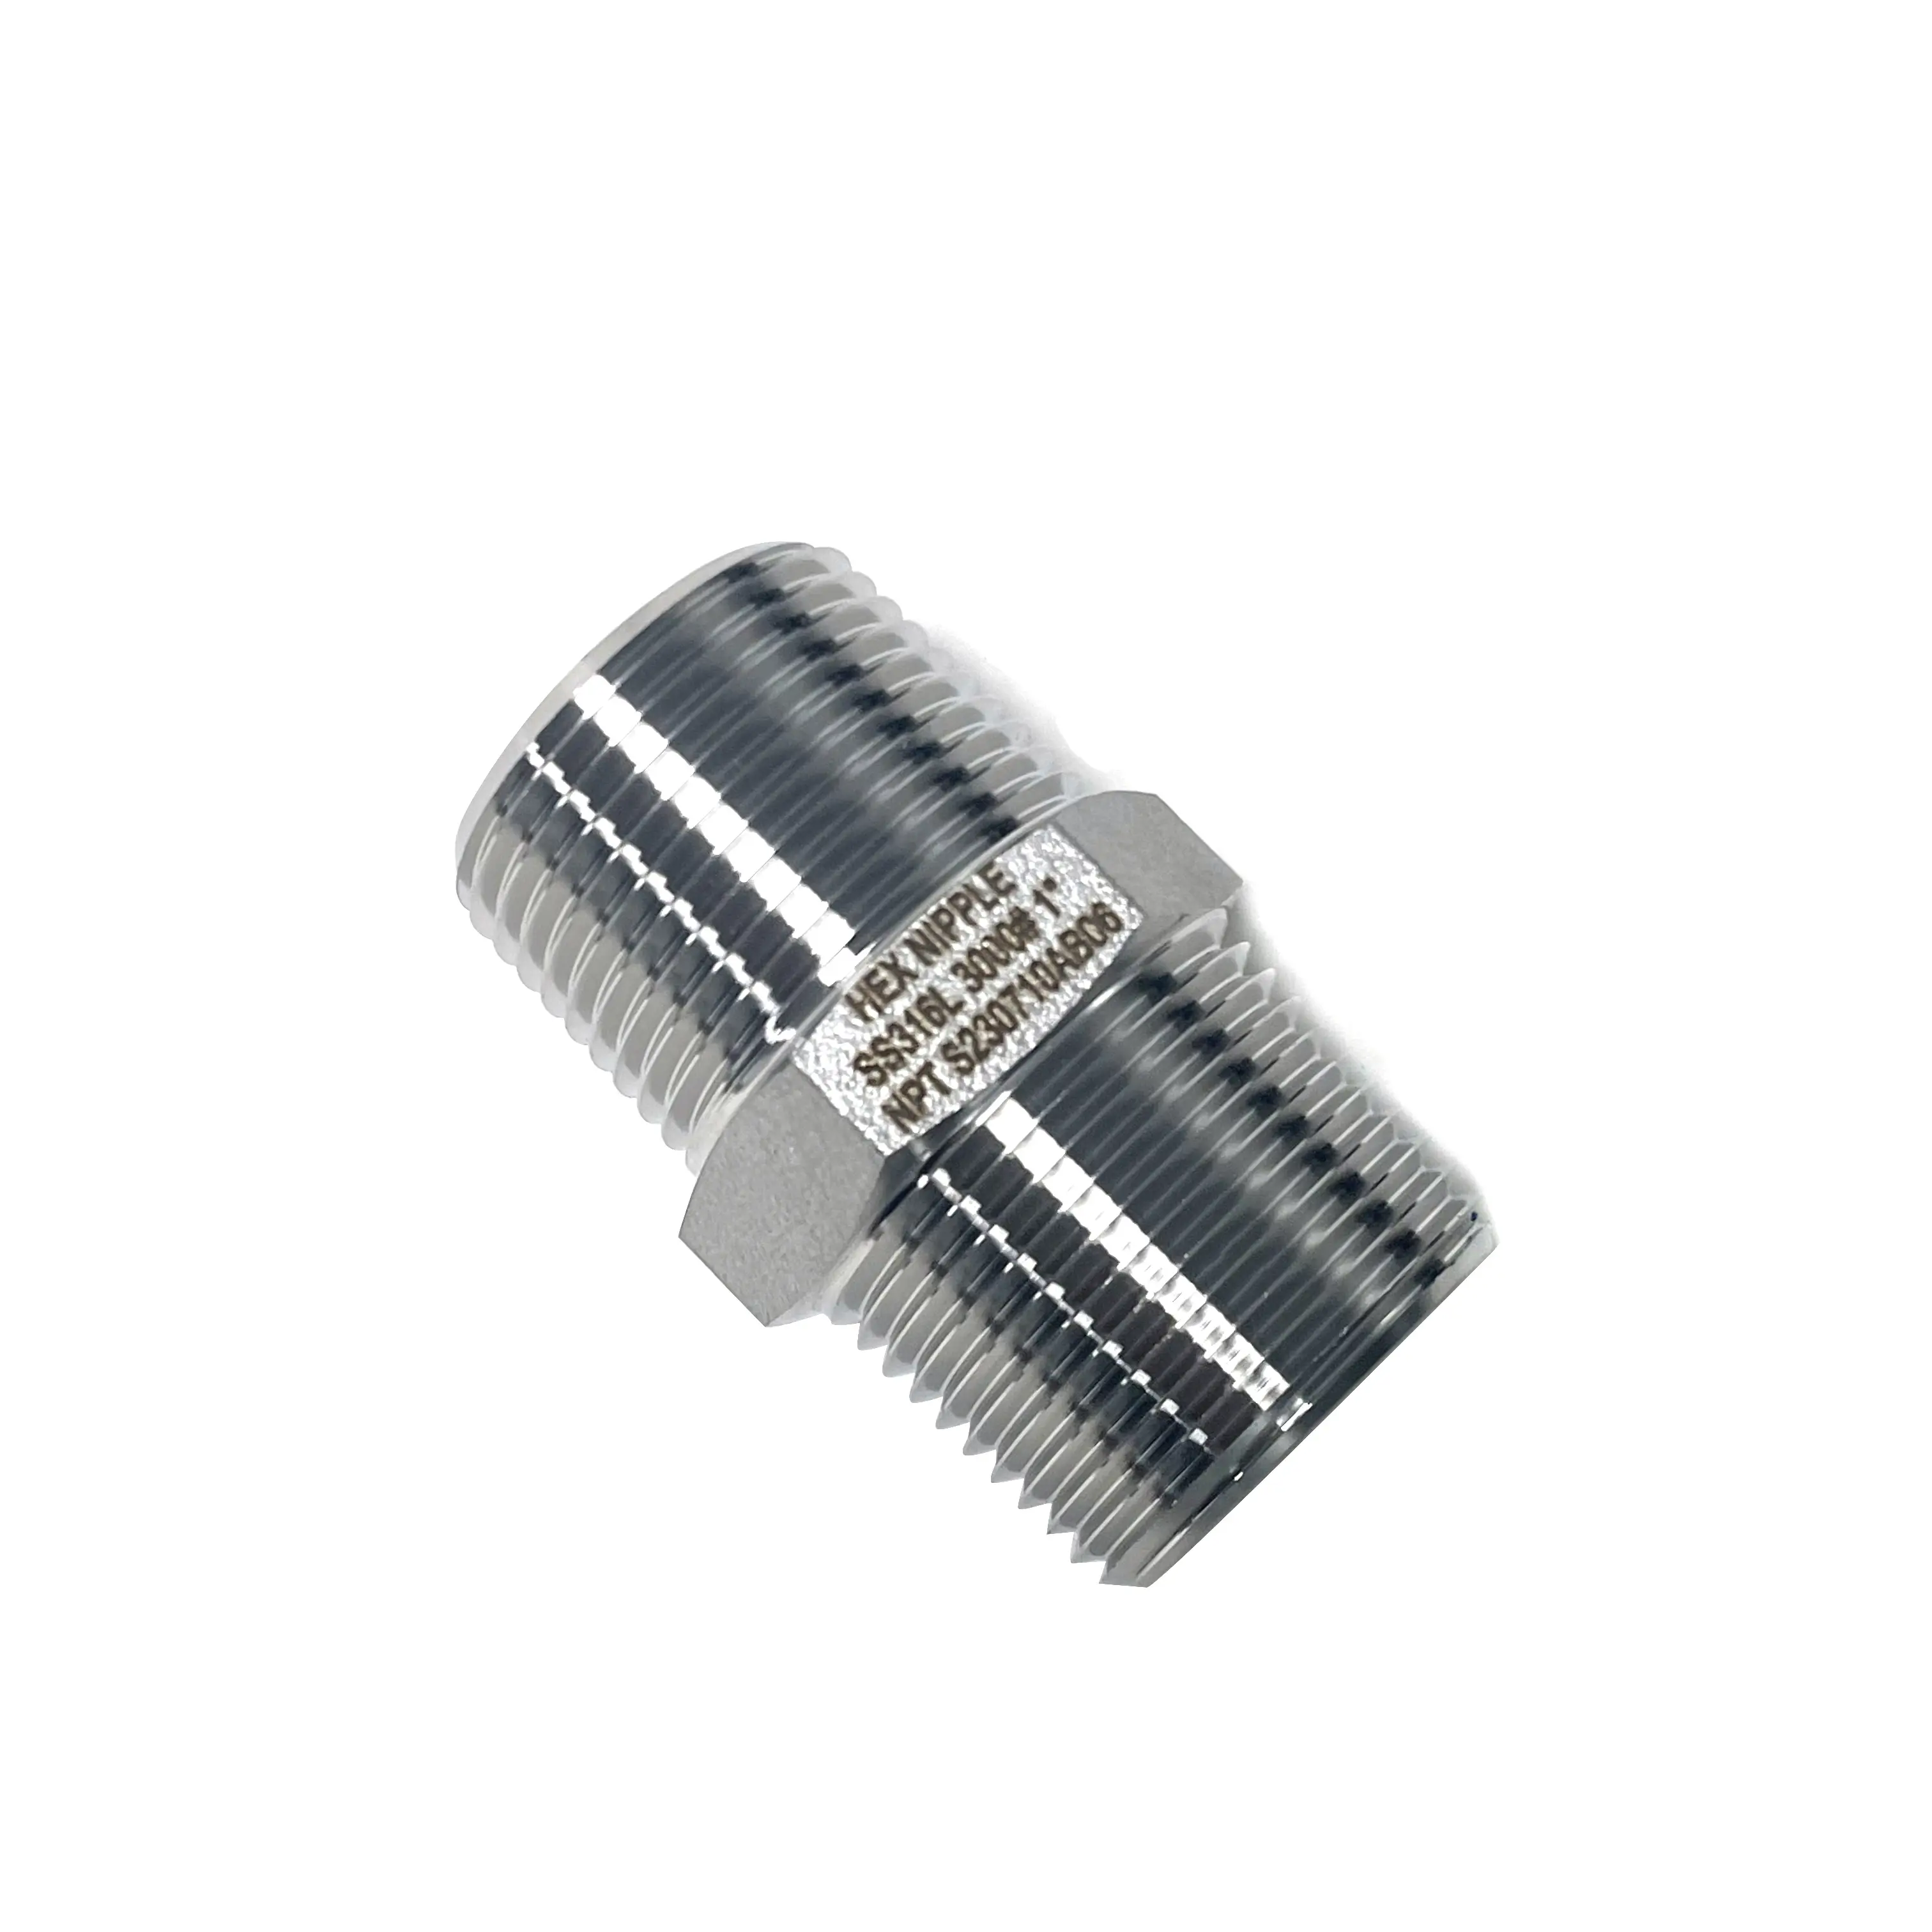 Hydraulic Stainless Steel 316L 3000LBS 1"x1" BSPT BSPP SAE NPT Male Thread Hex Nipple for pipe fitting